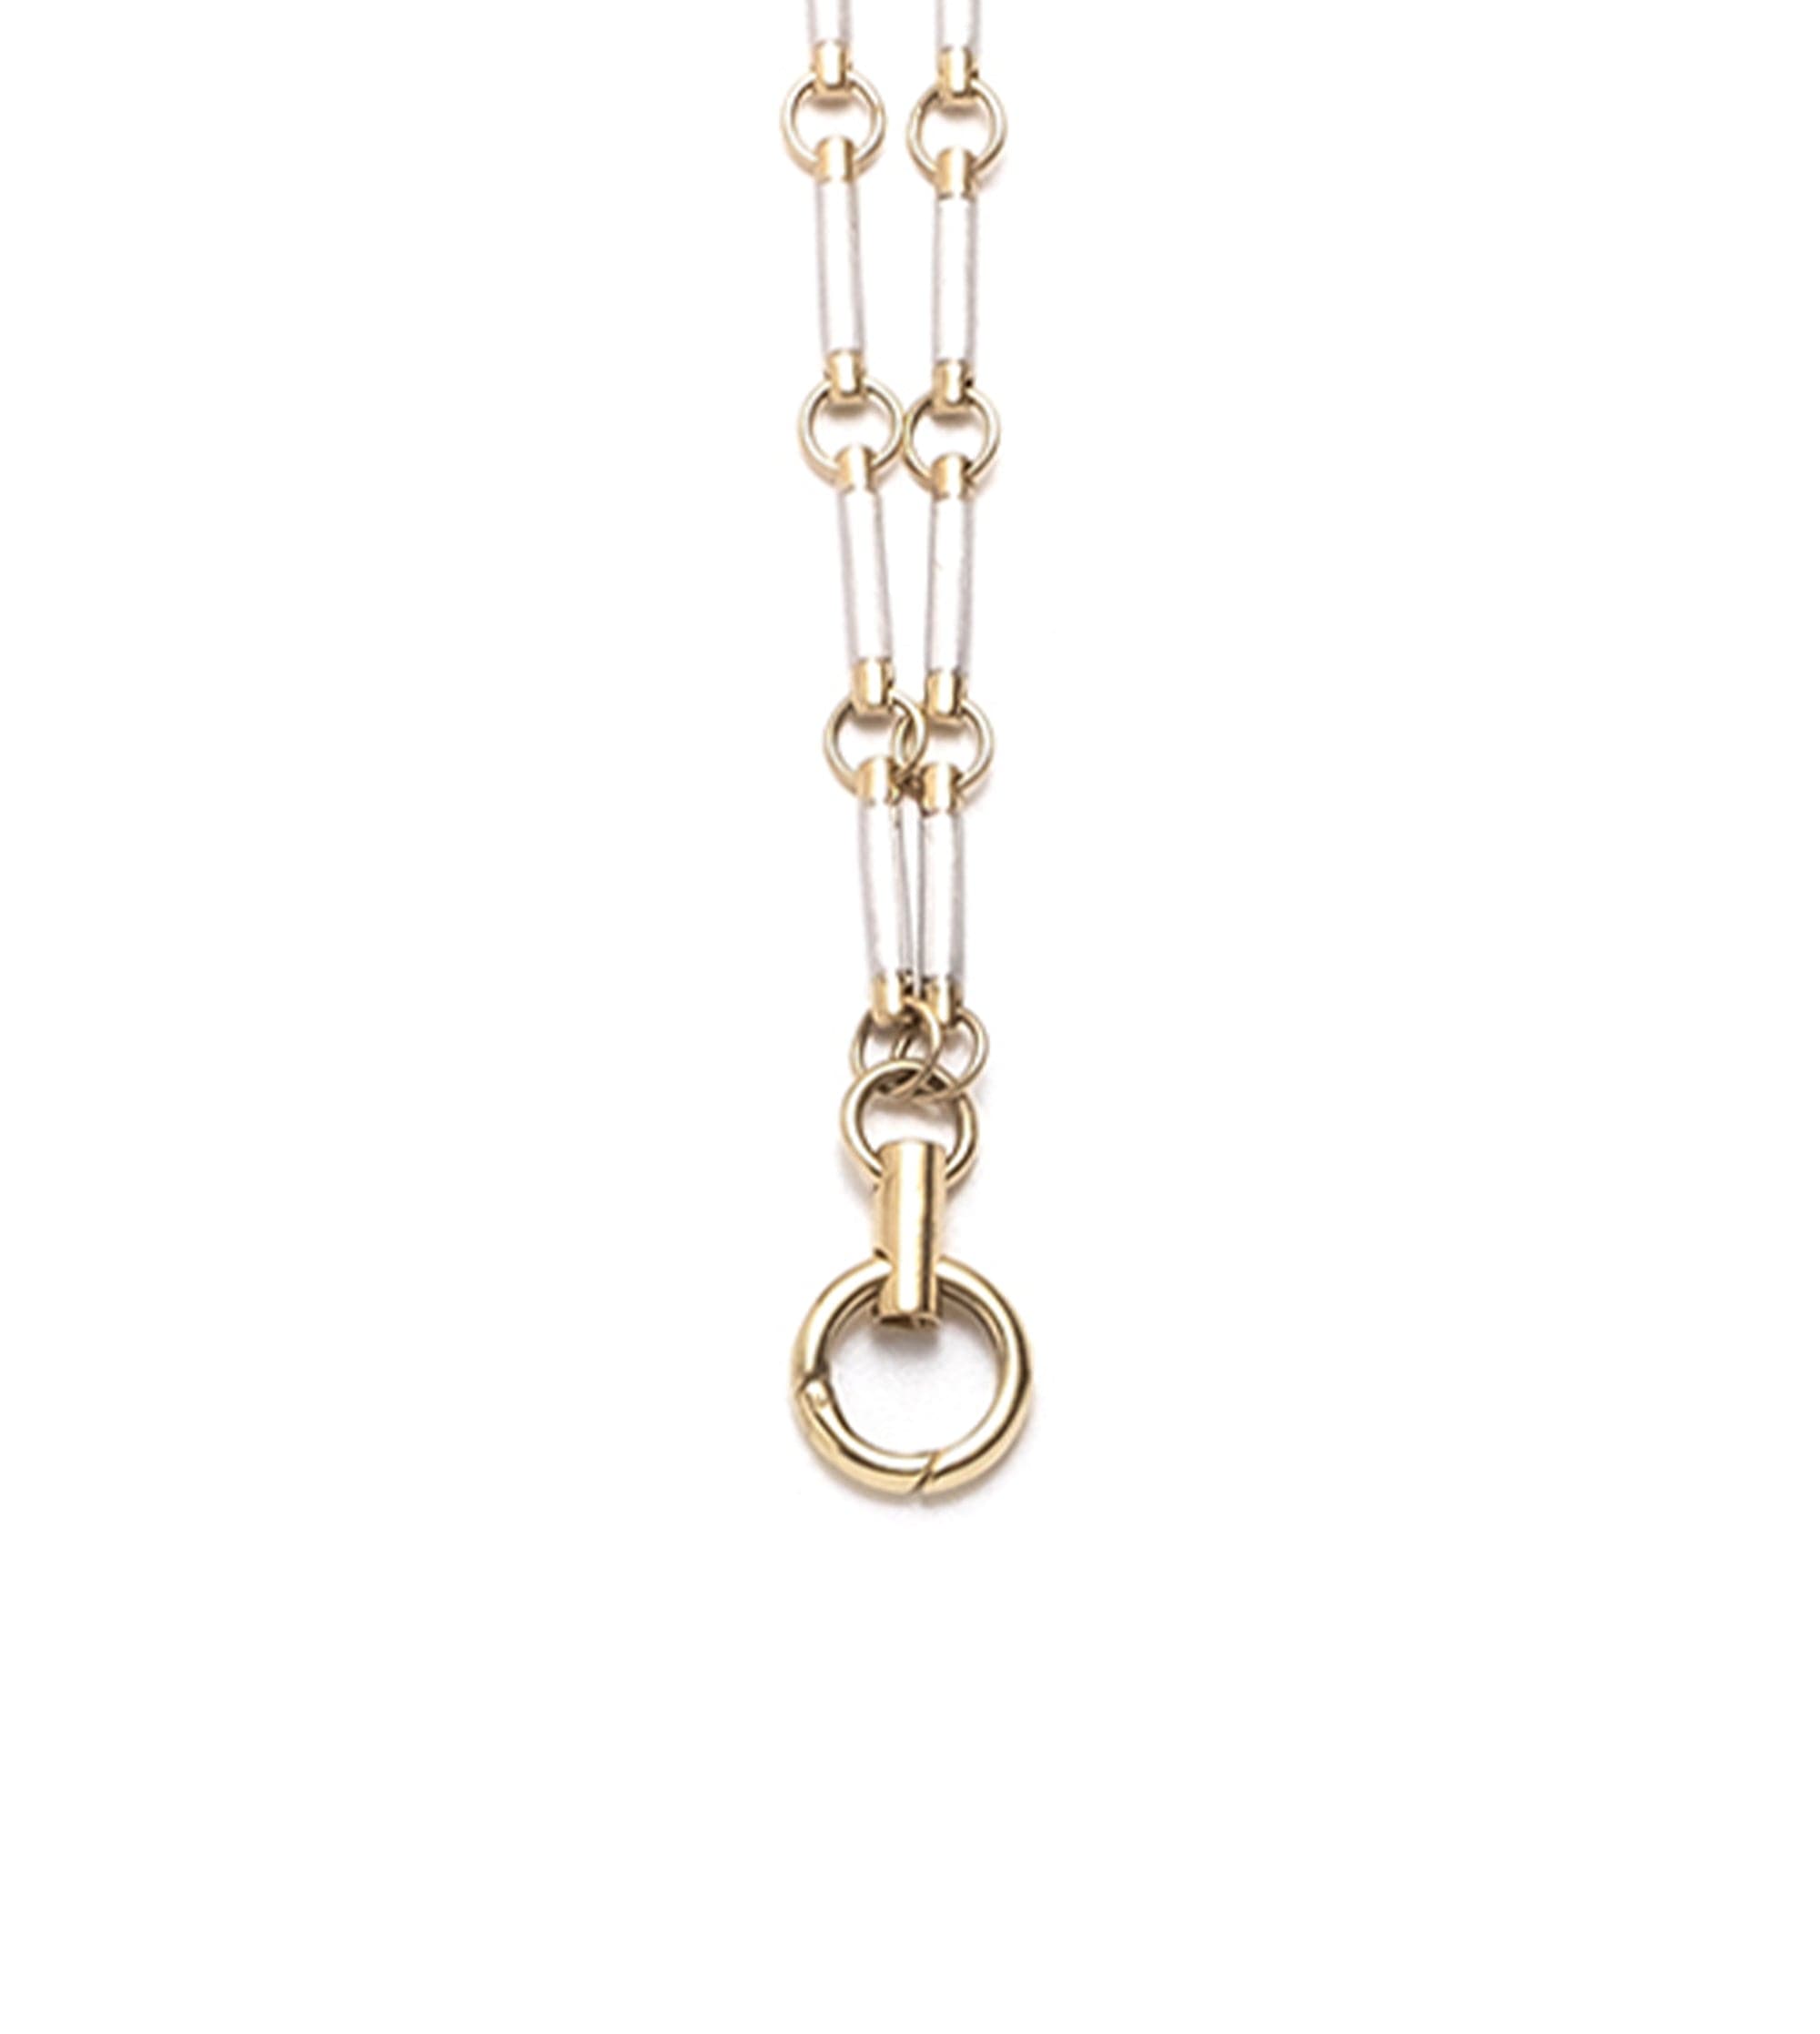 Gold Element Hanging Clockweight Chain